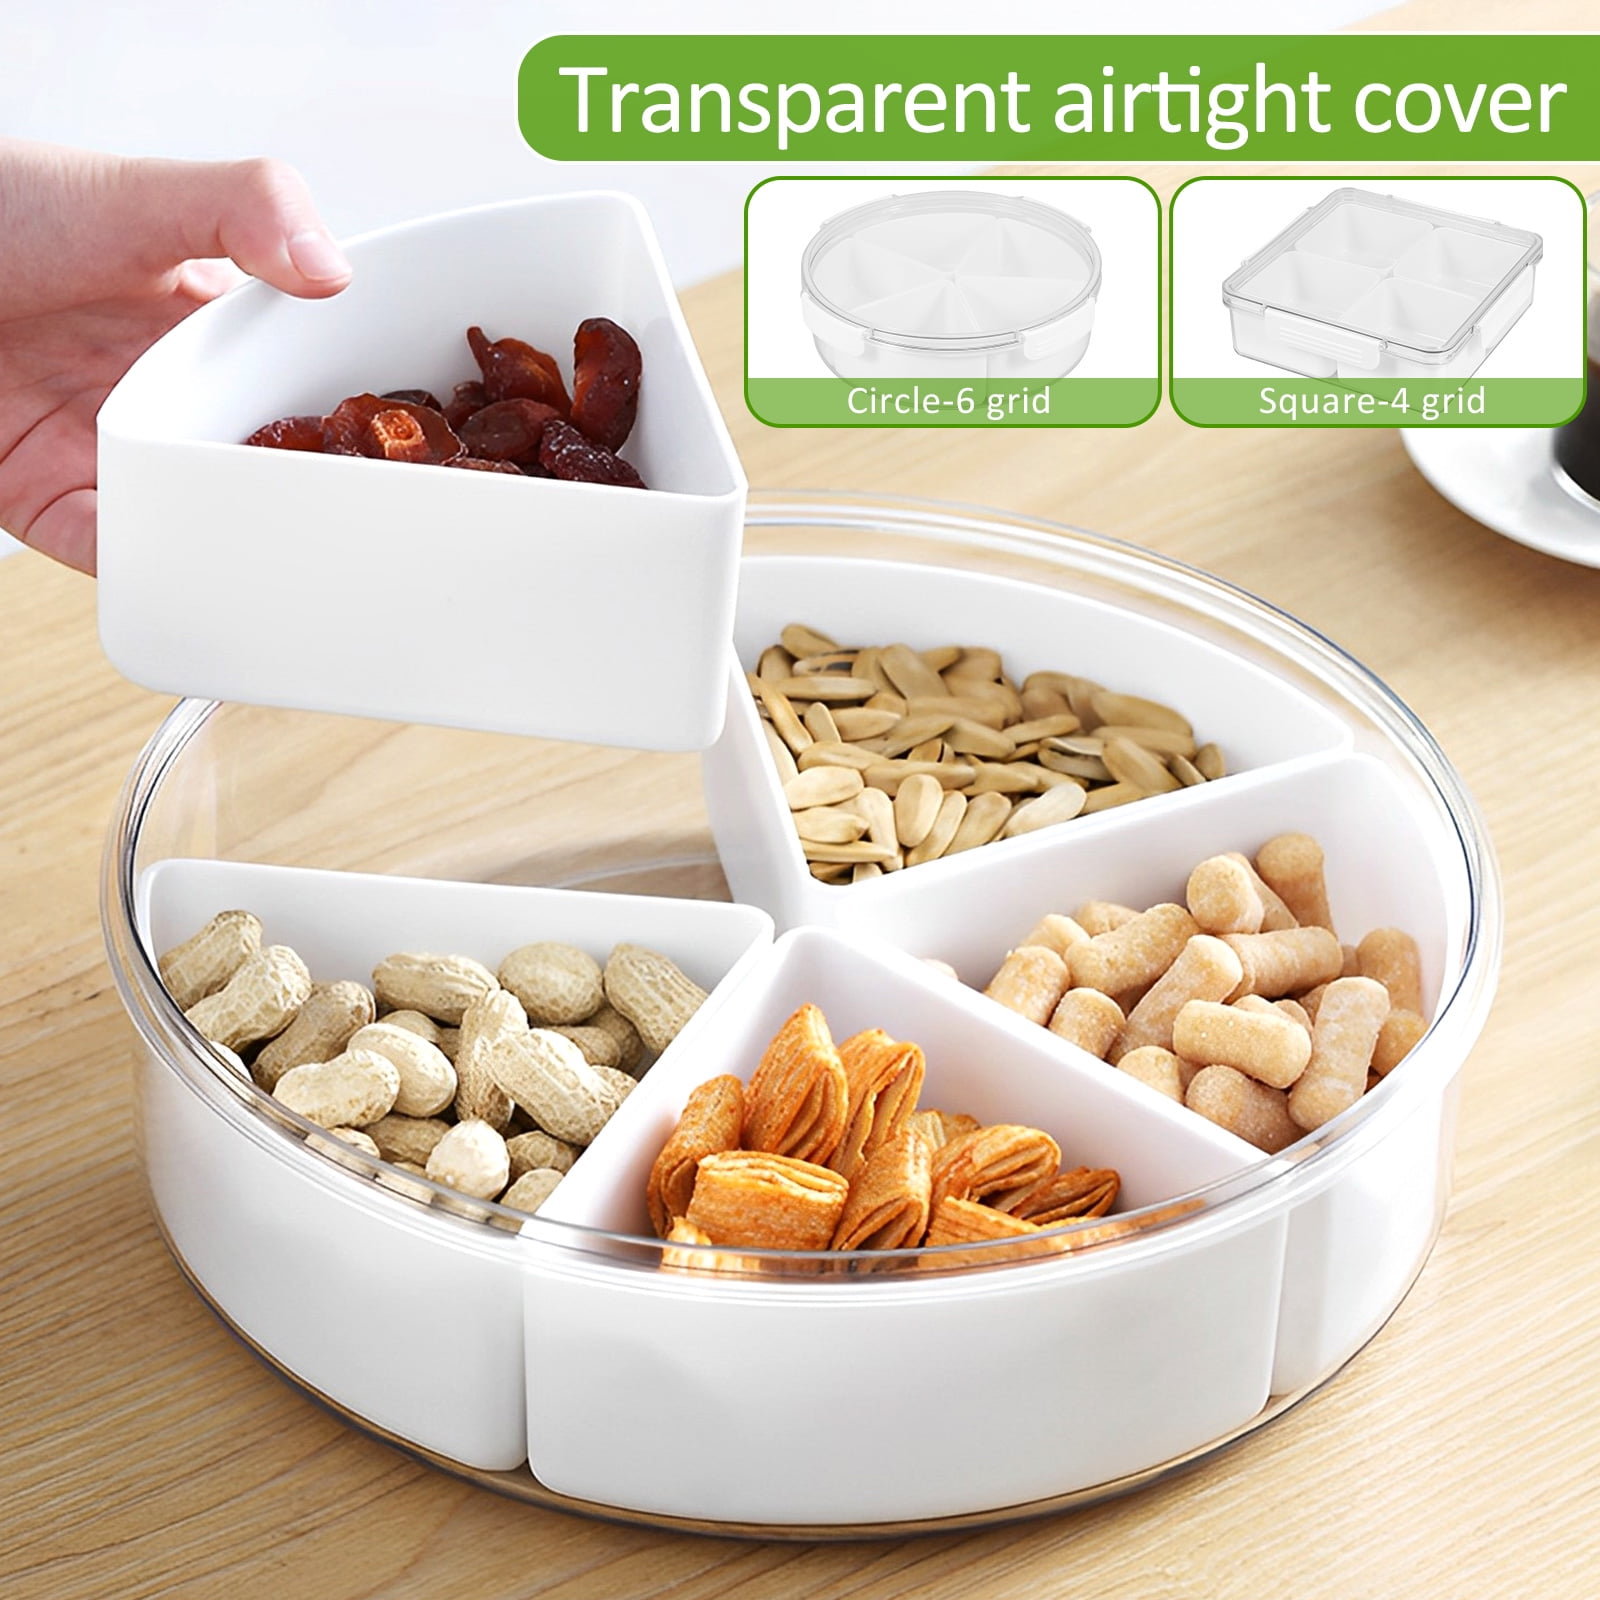 Yesbay Food Storage Box Large Capacity Multi-compartments Eco-Friendly Food Grade Fresh-keeping Transparent PP Material Fridge Food Container Divided